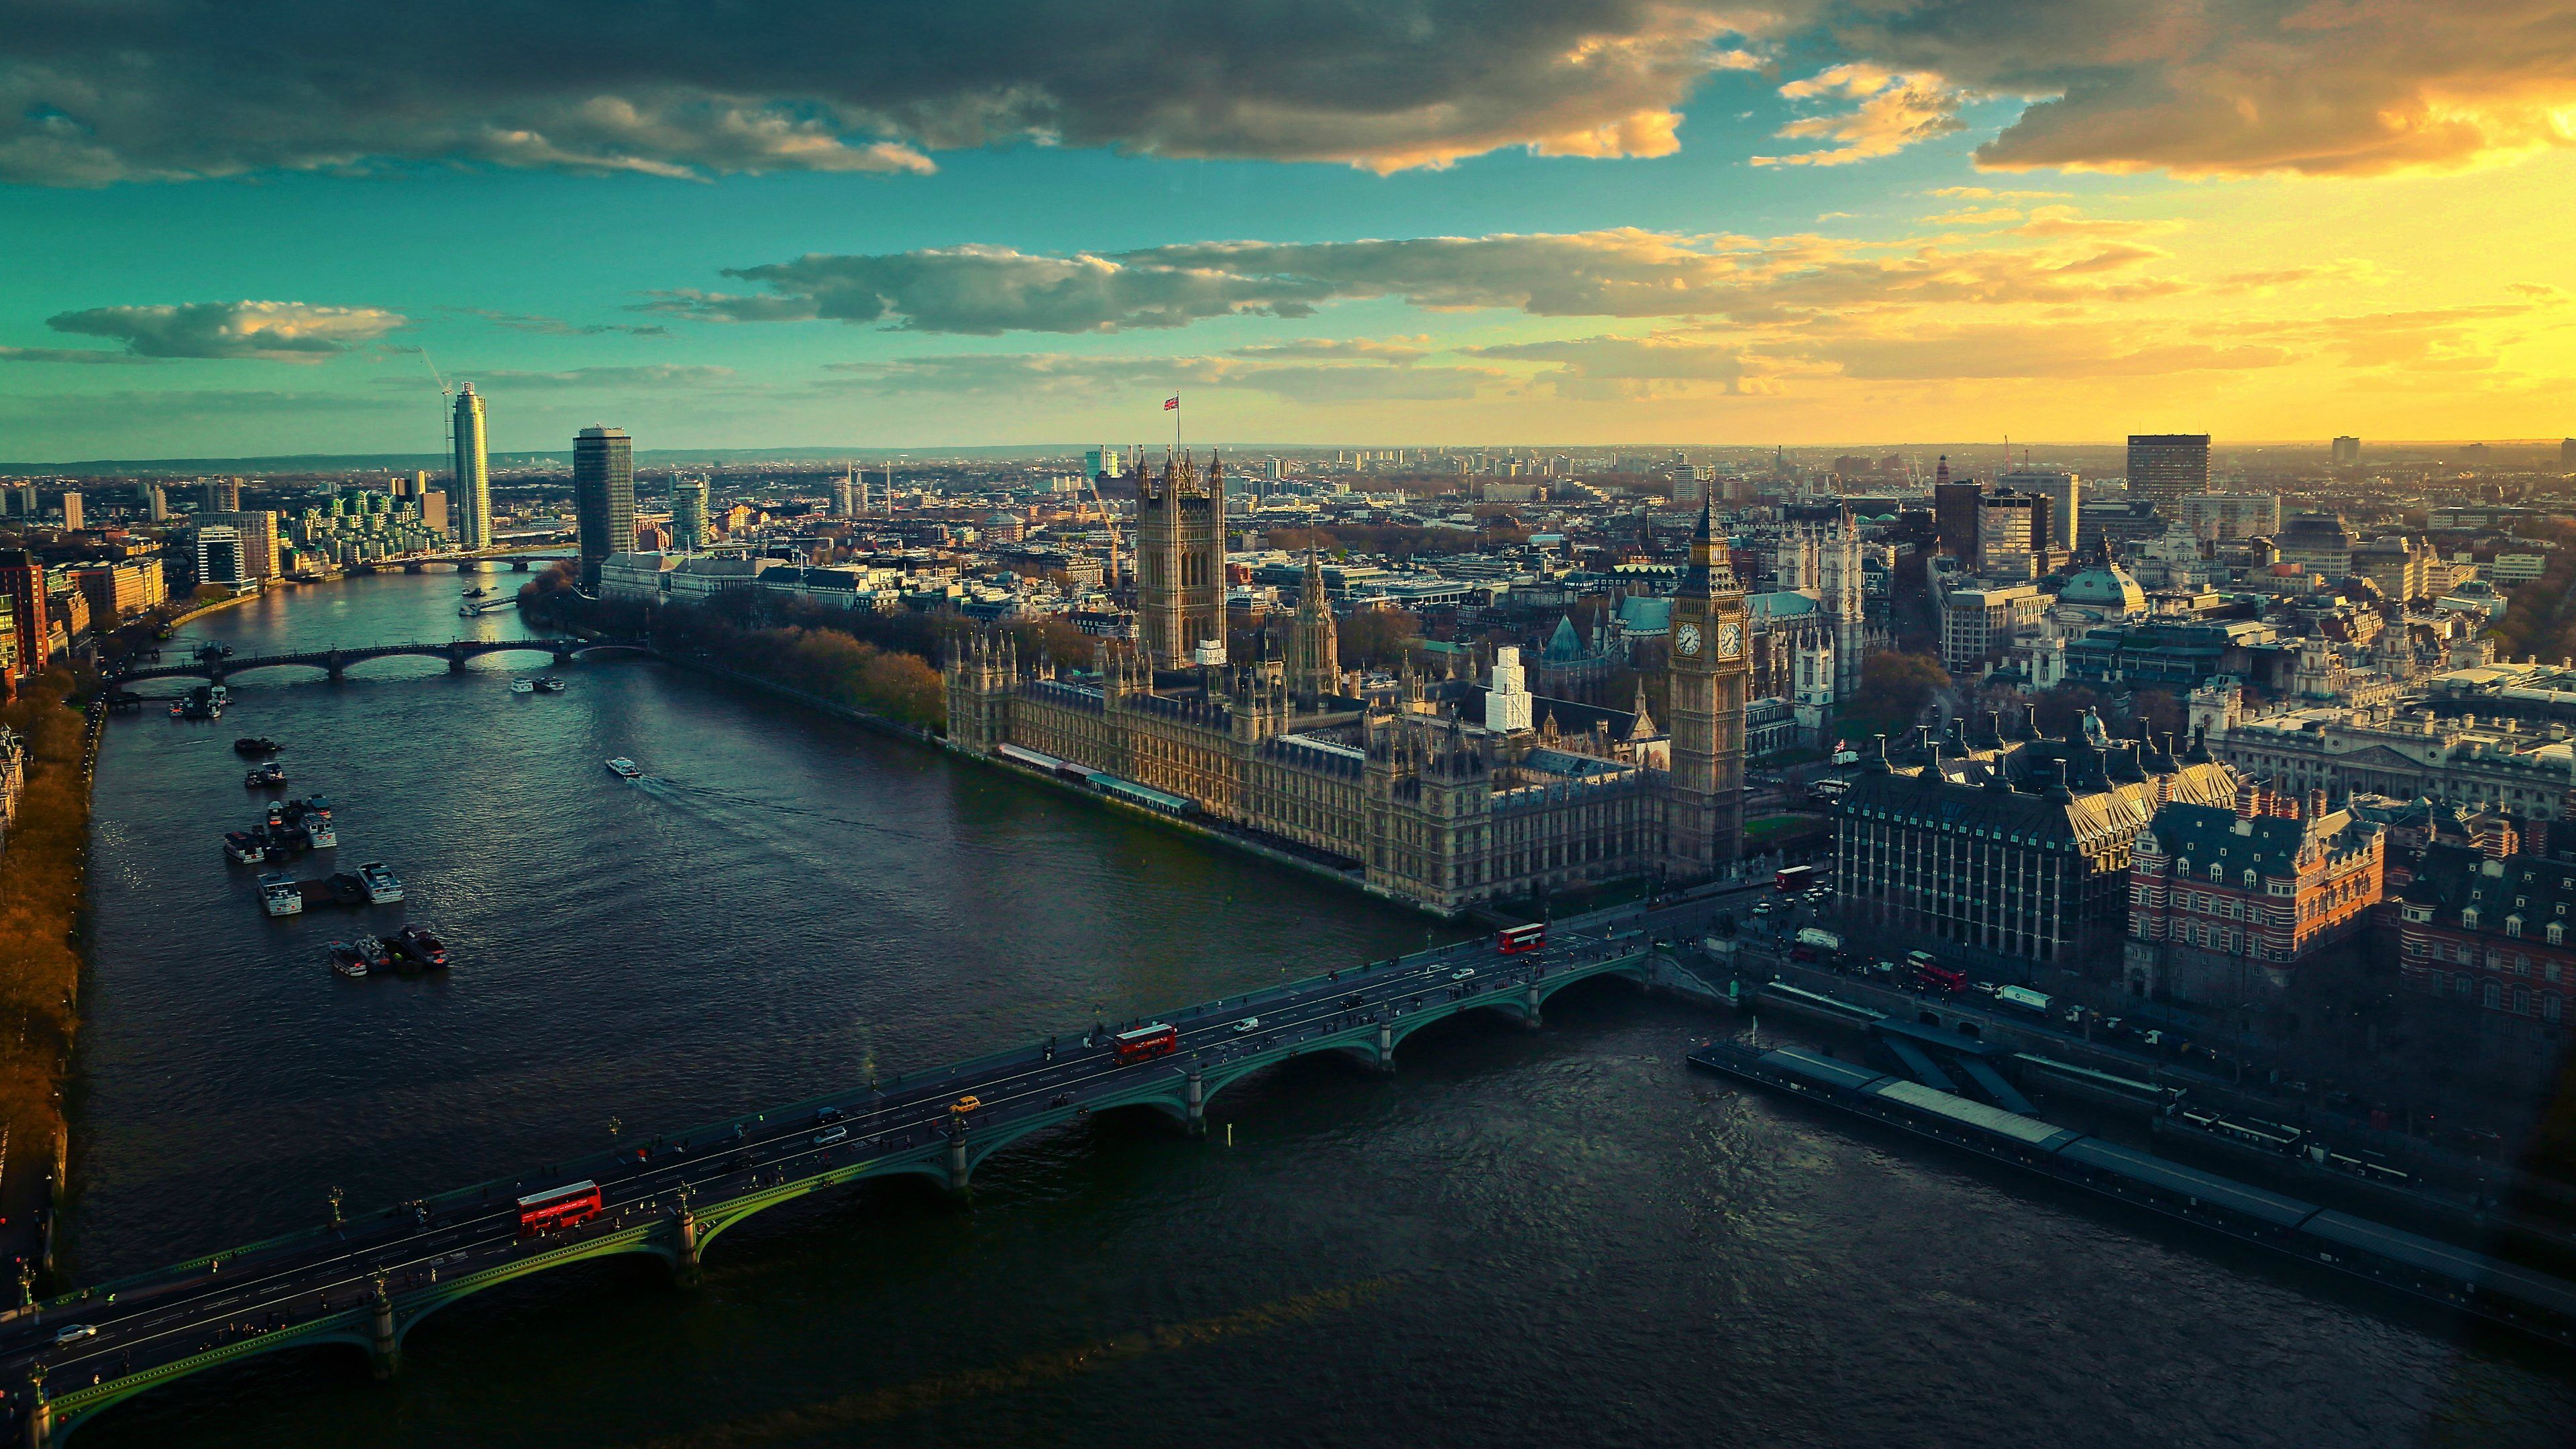 London 4K wallpaper for your desktop or mobile screen free and easy to download